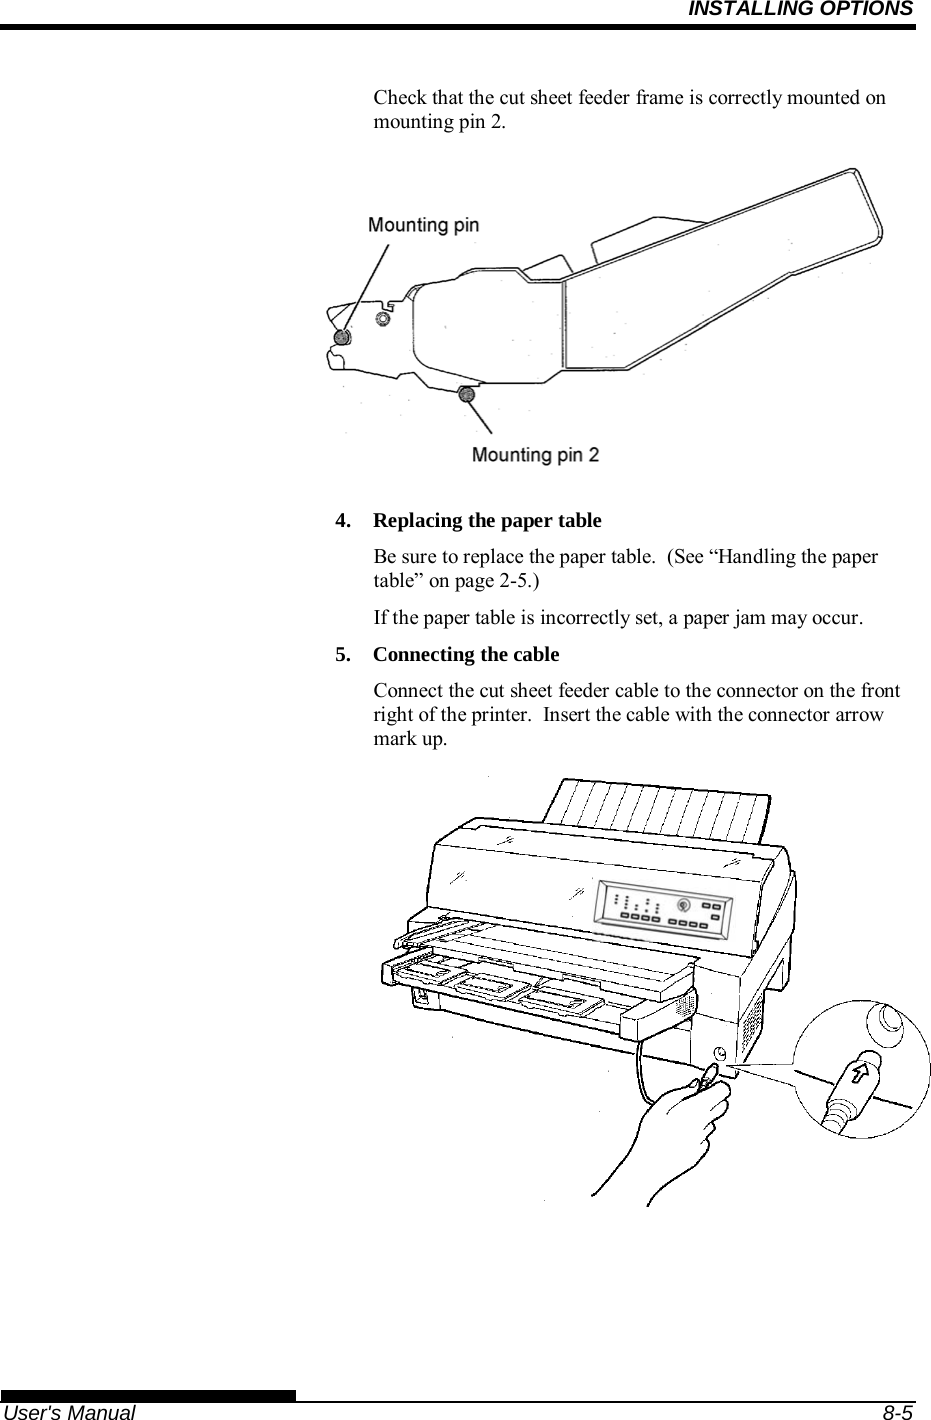 INSTALLING OPTIONS   User&apos;s Manual  8-5 Check that the cut sheet feeder frame is correctly mounted on mounting pin 2.  4.  Replacing the paper table Be sure to replace the paper table.  (See “Handling the paper table” on page 2-5.) If the paper table is incorrectly set, a paper jam may occur. 5.  Connecting the cable Connect the cut sheet feeder cable to the connector on the front right of the printer.  Insert the cable with the connector arrow mark up.   